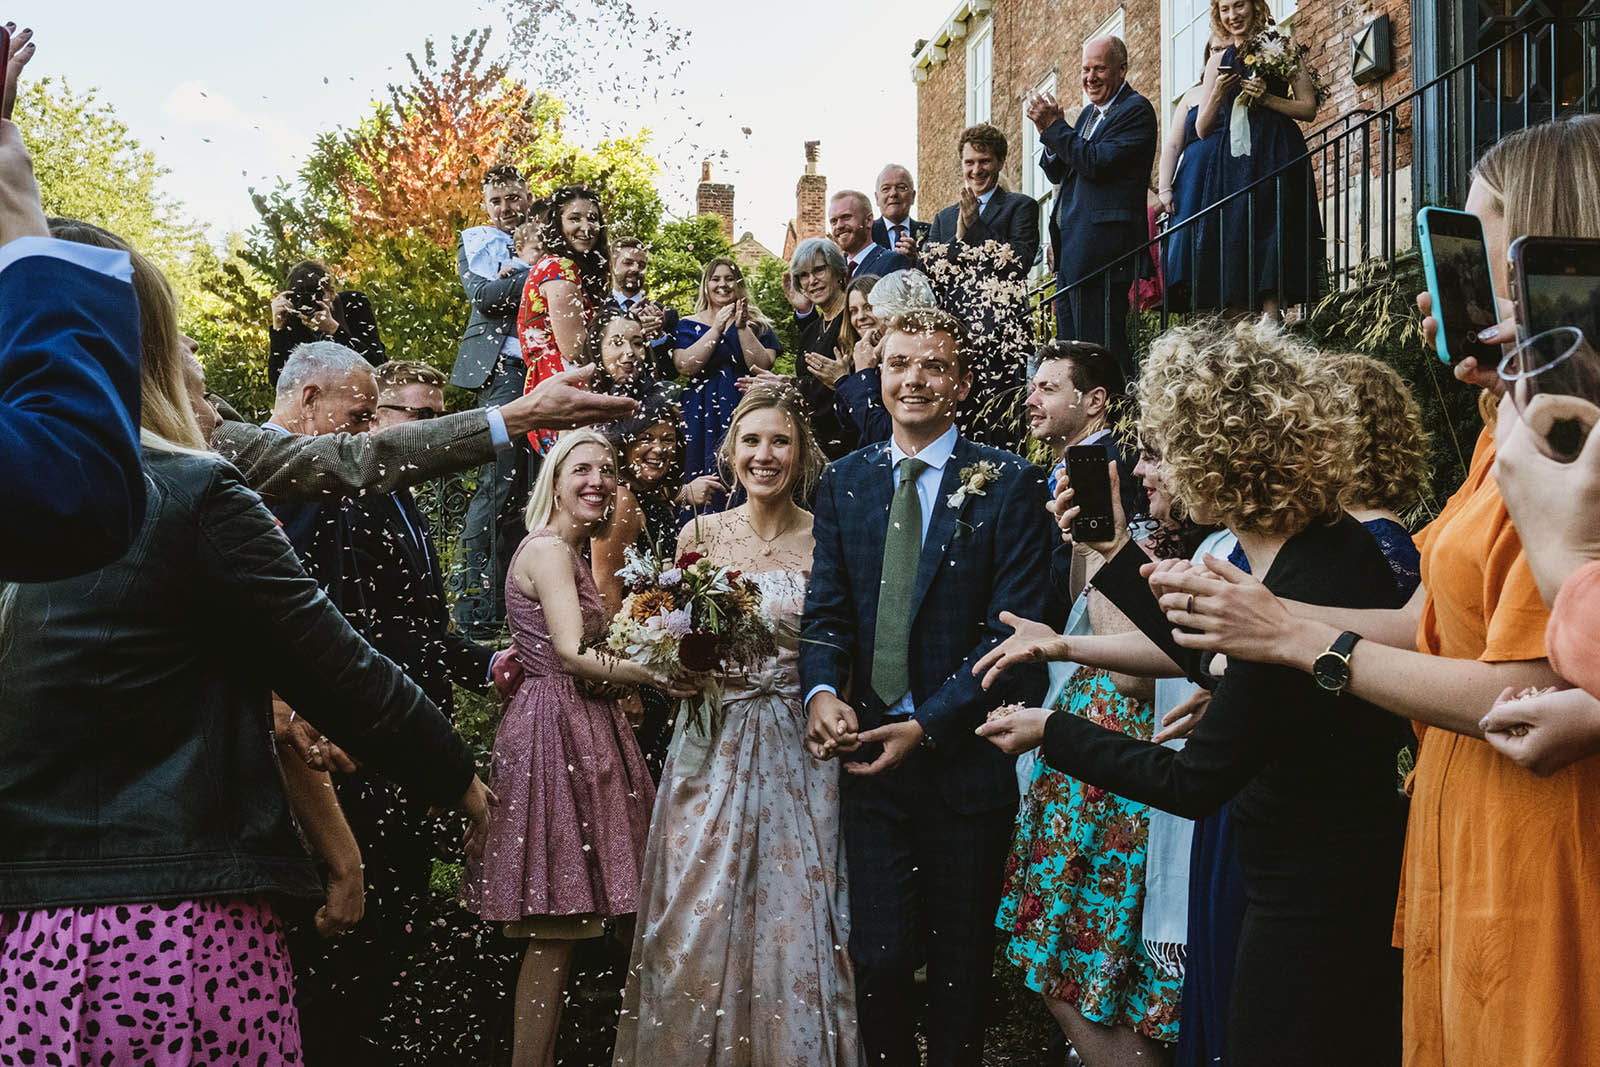 Newlyweds leaving the venue in a cloud of dried petal confetti. Unposed and natural wedding photography with real smiles, by York Place Studios